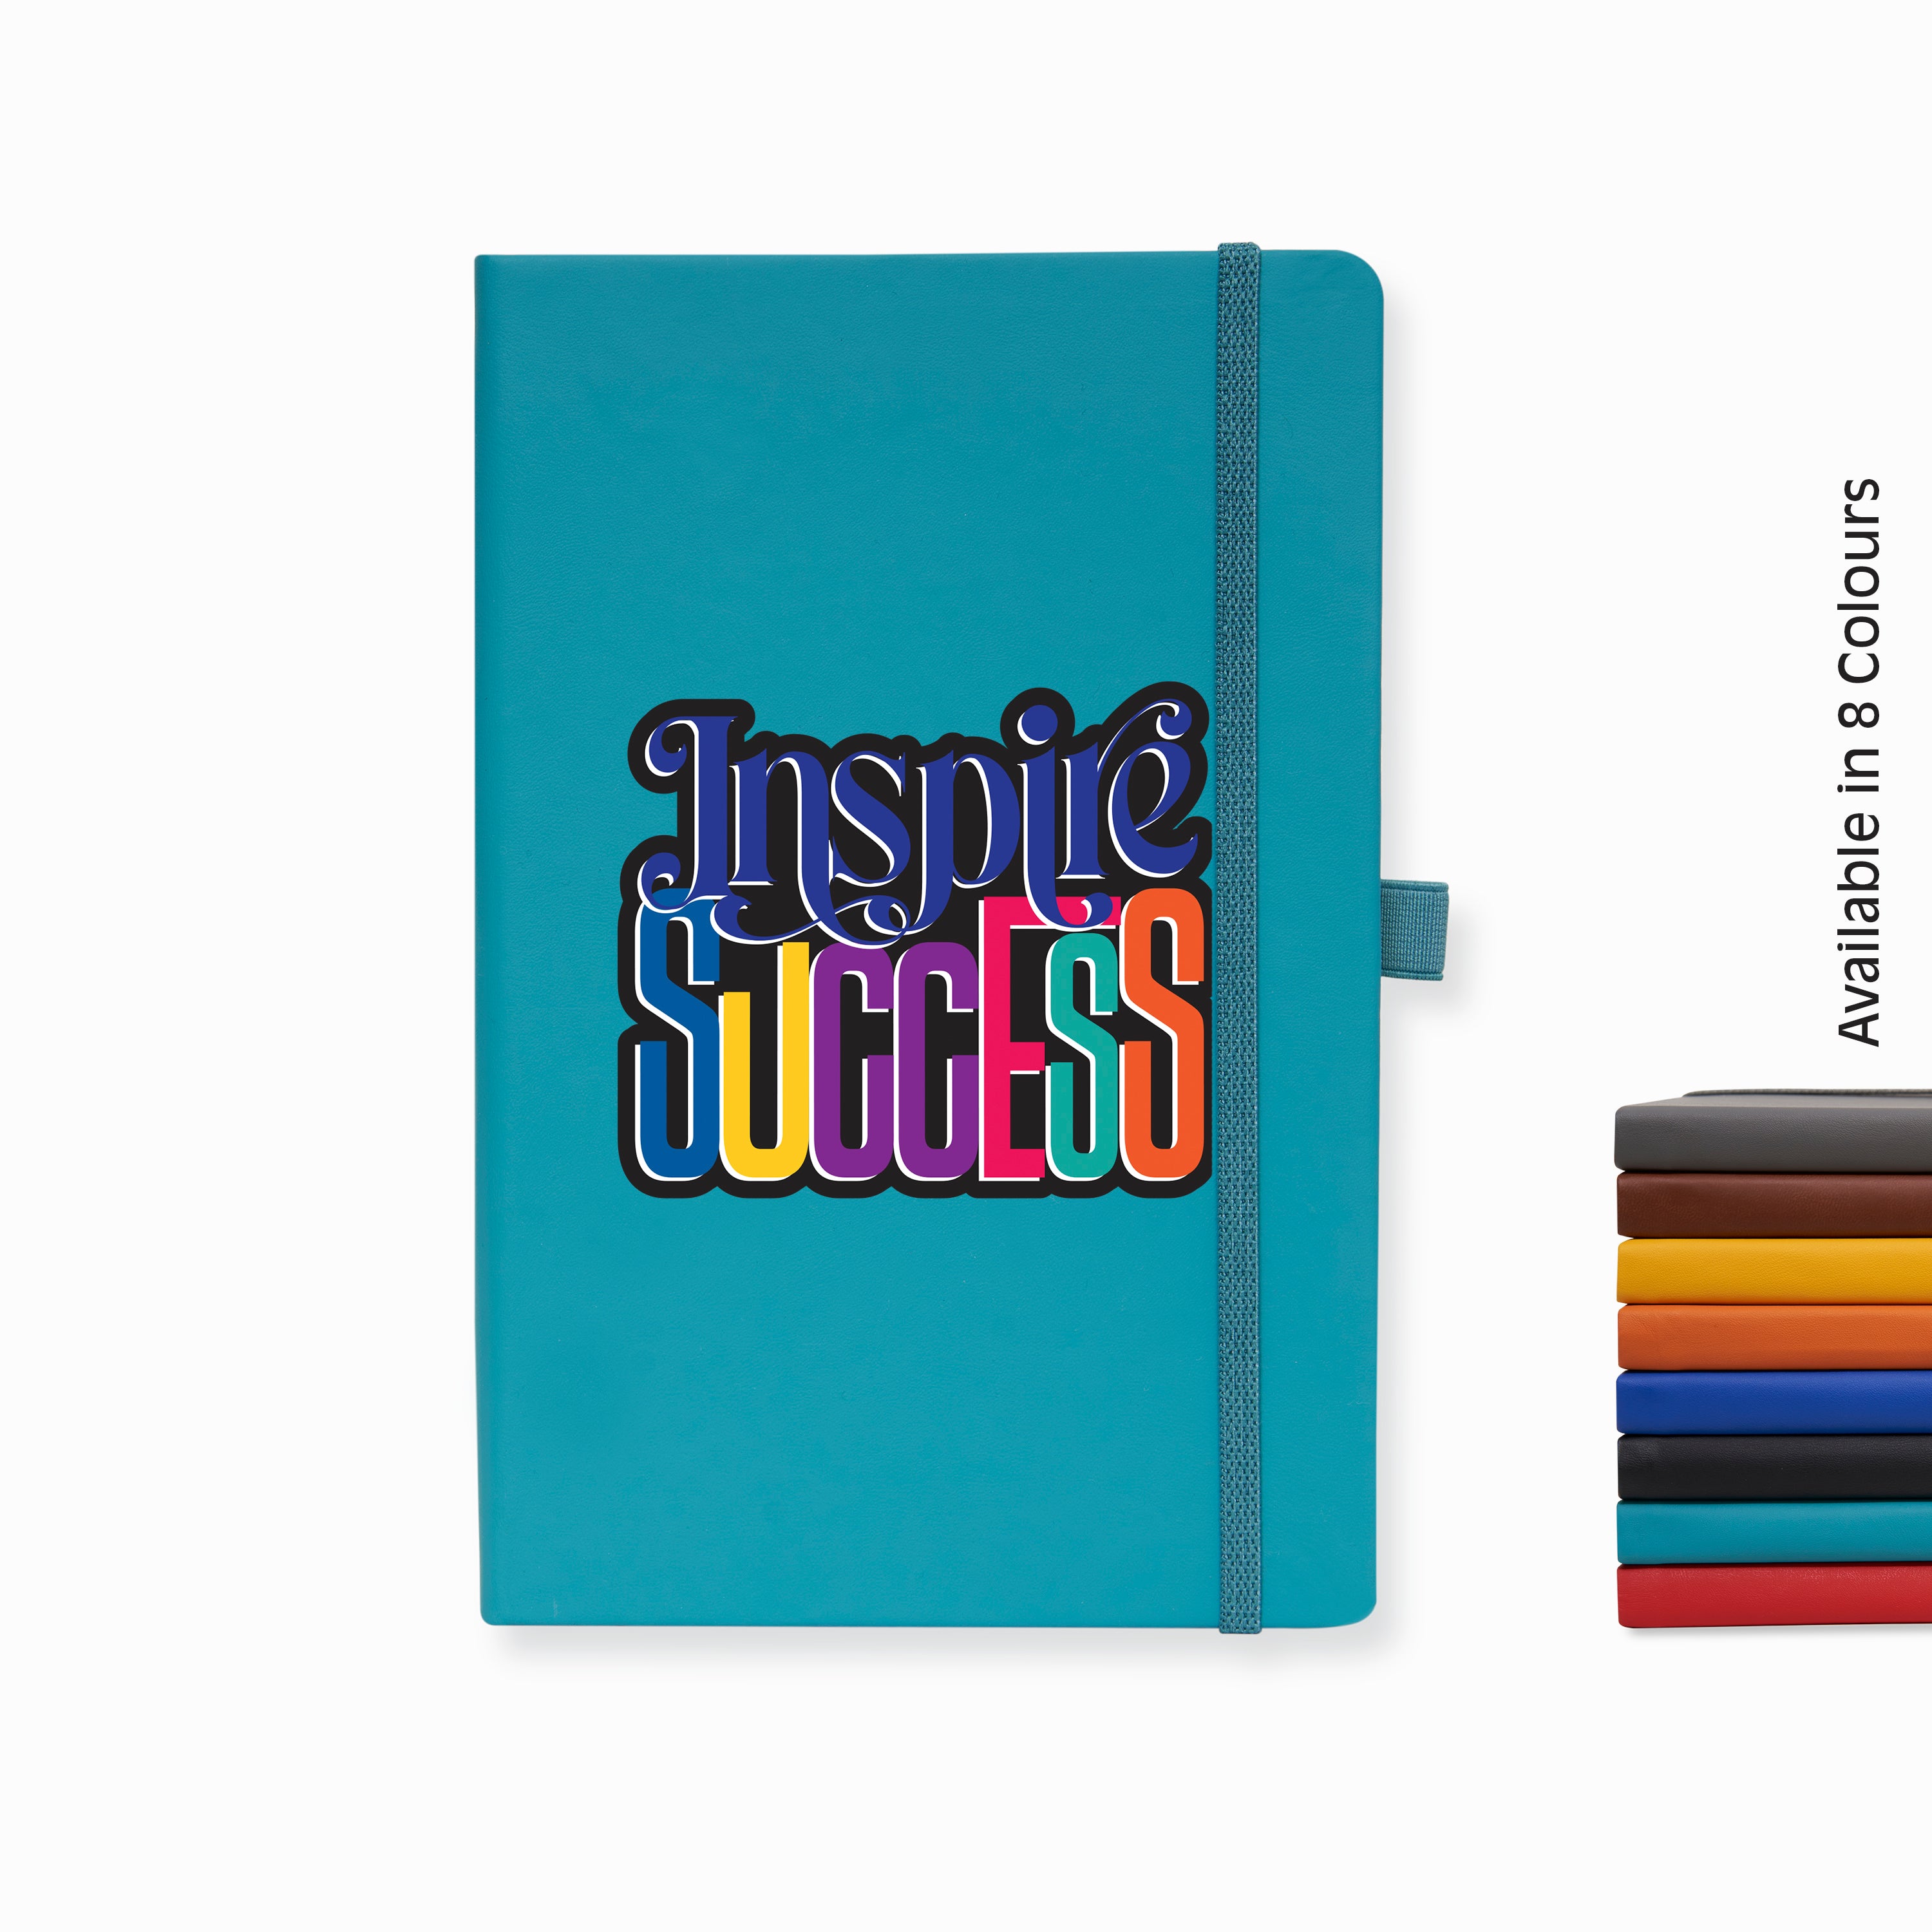 Doodle Pro Series Executive A5 PU Leather Hardbound Ruled Turkish Blue Notebook with Pen Loop [Inspire Success]